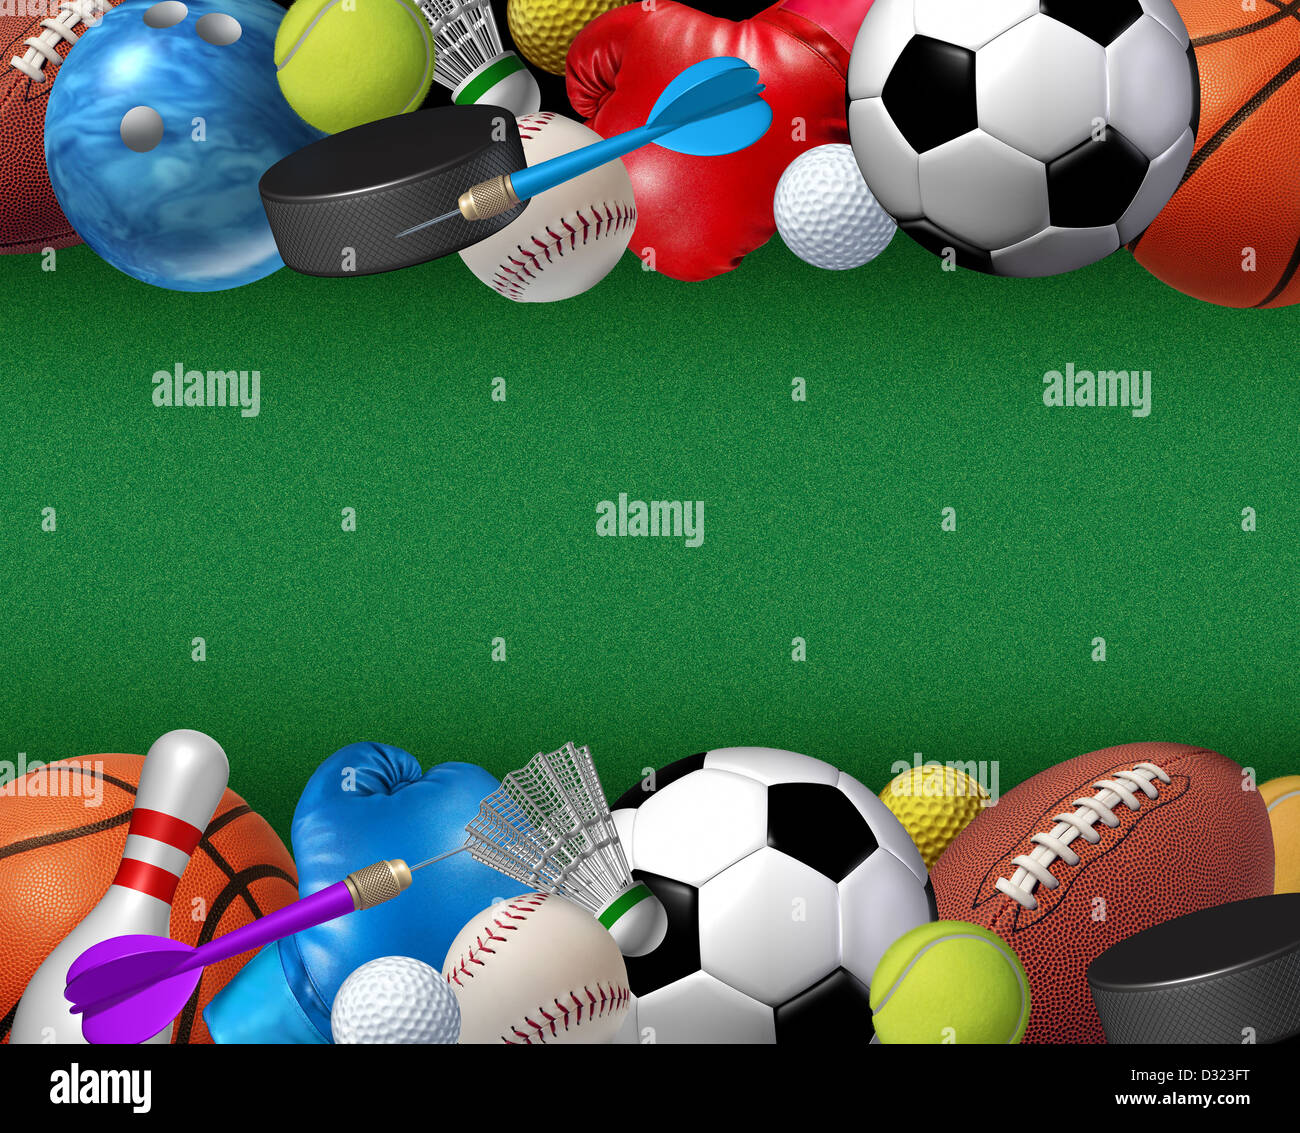 Sports and activities border with equipment from basketball boxing golf  bowling tennis badminton football soccer darts ice hockey and baseball as a  fitness and health design element on a green textured background